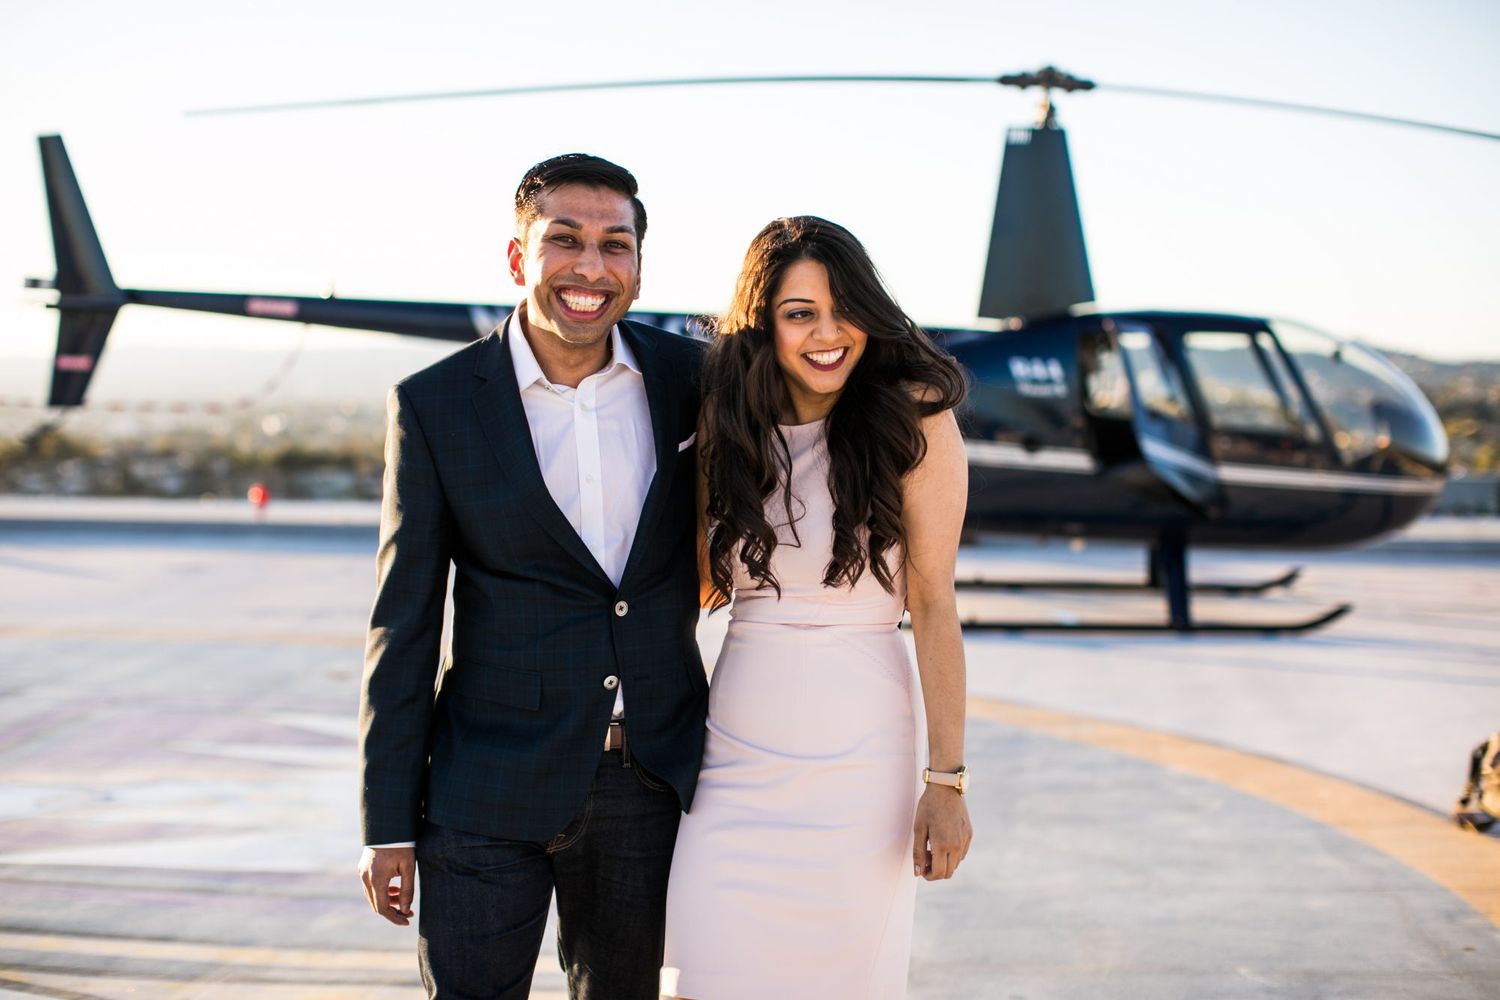 outdoor engagement photo with helicopter